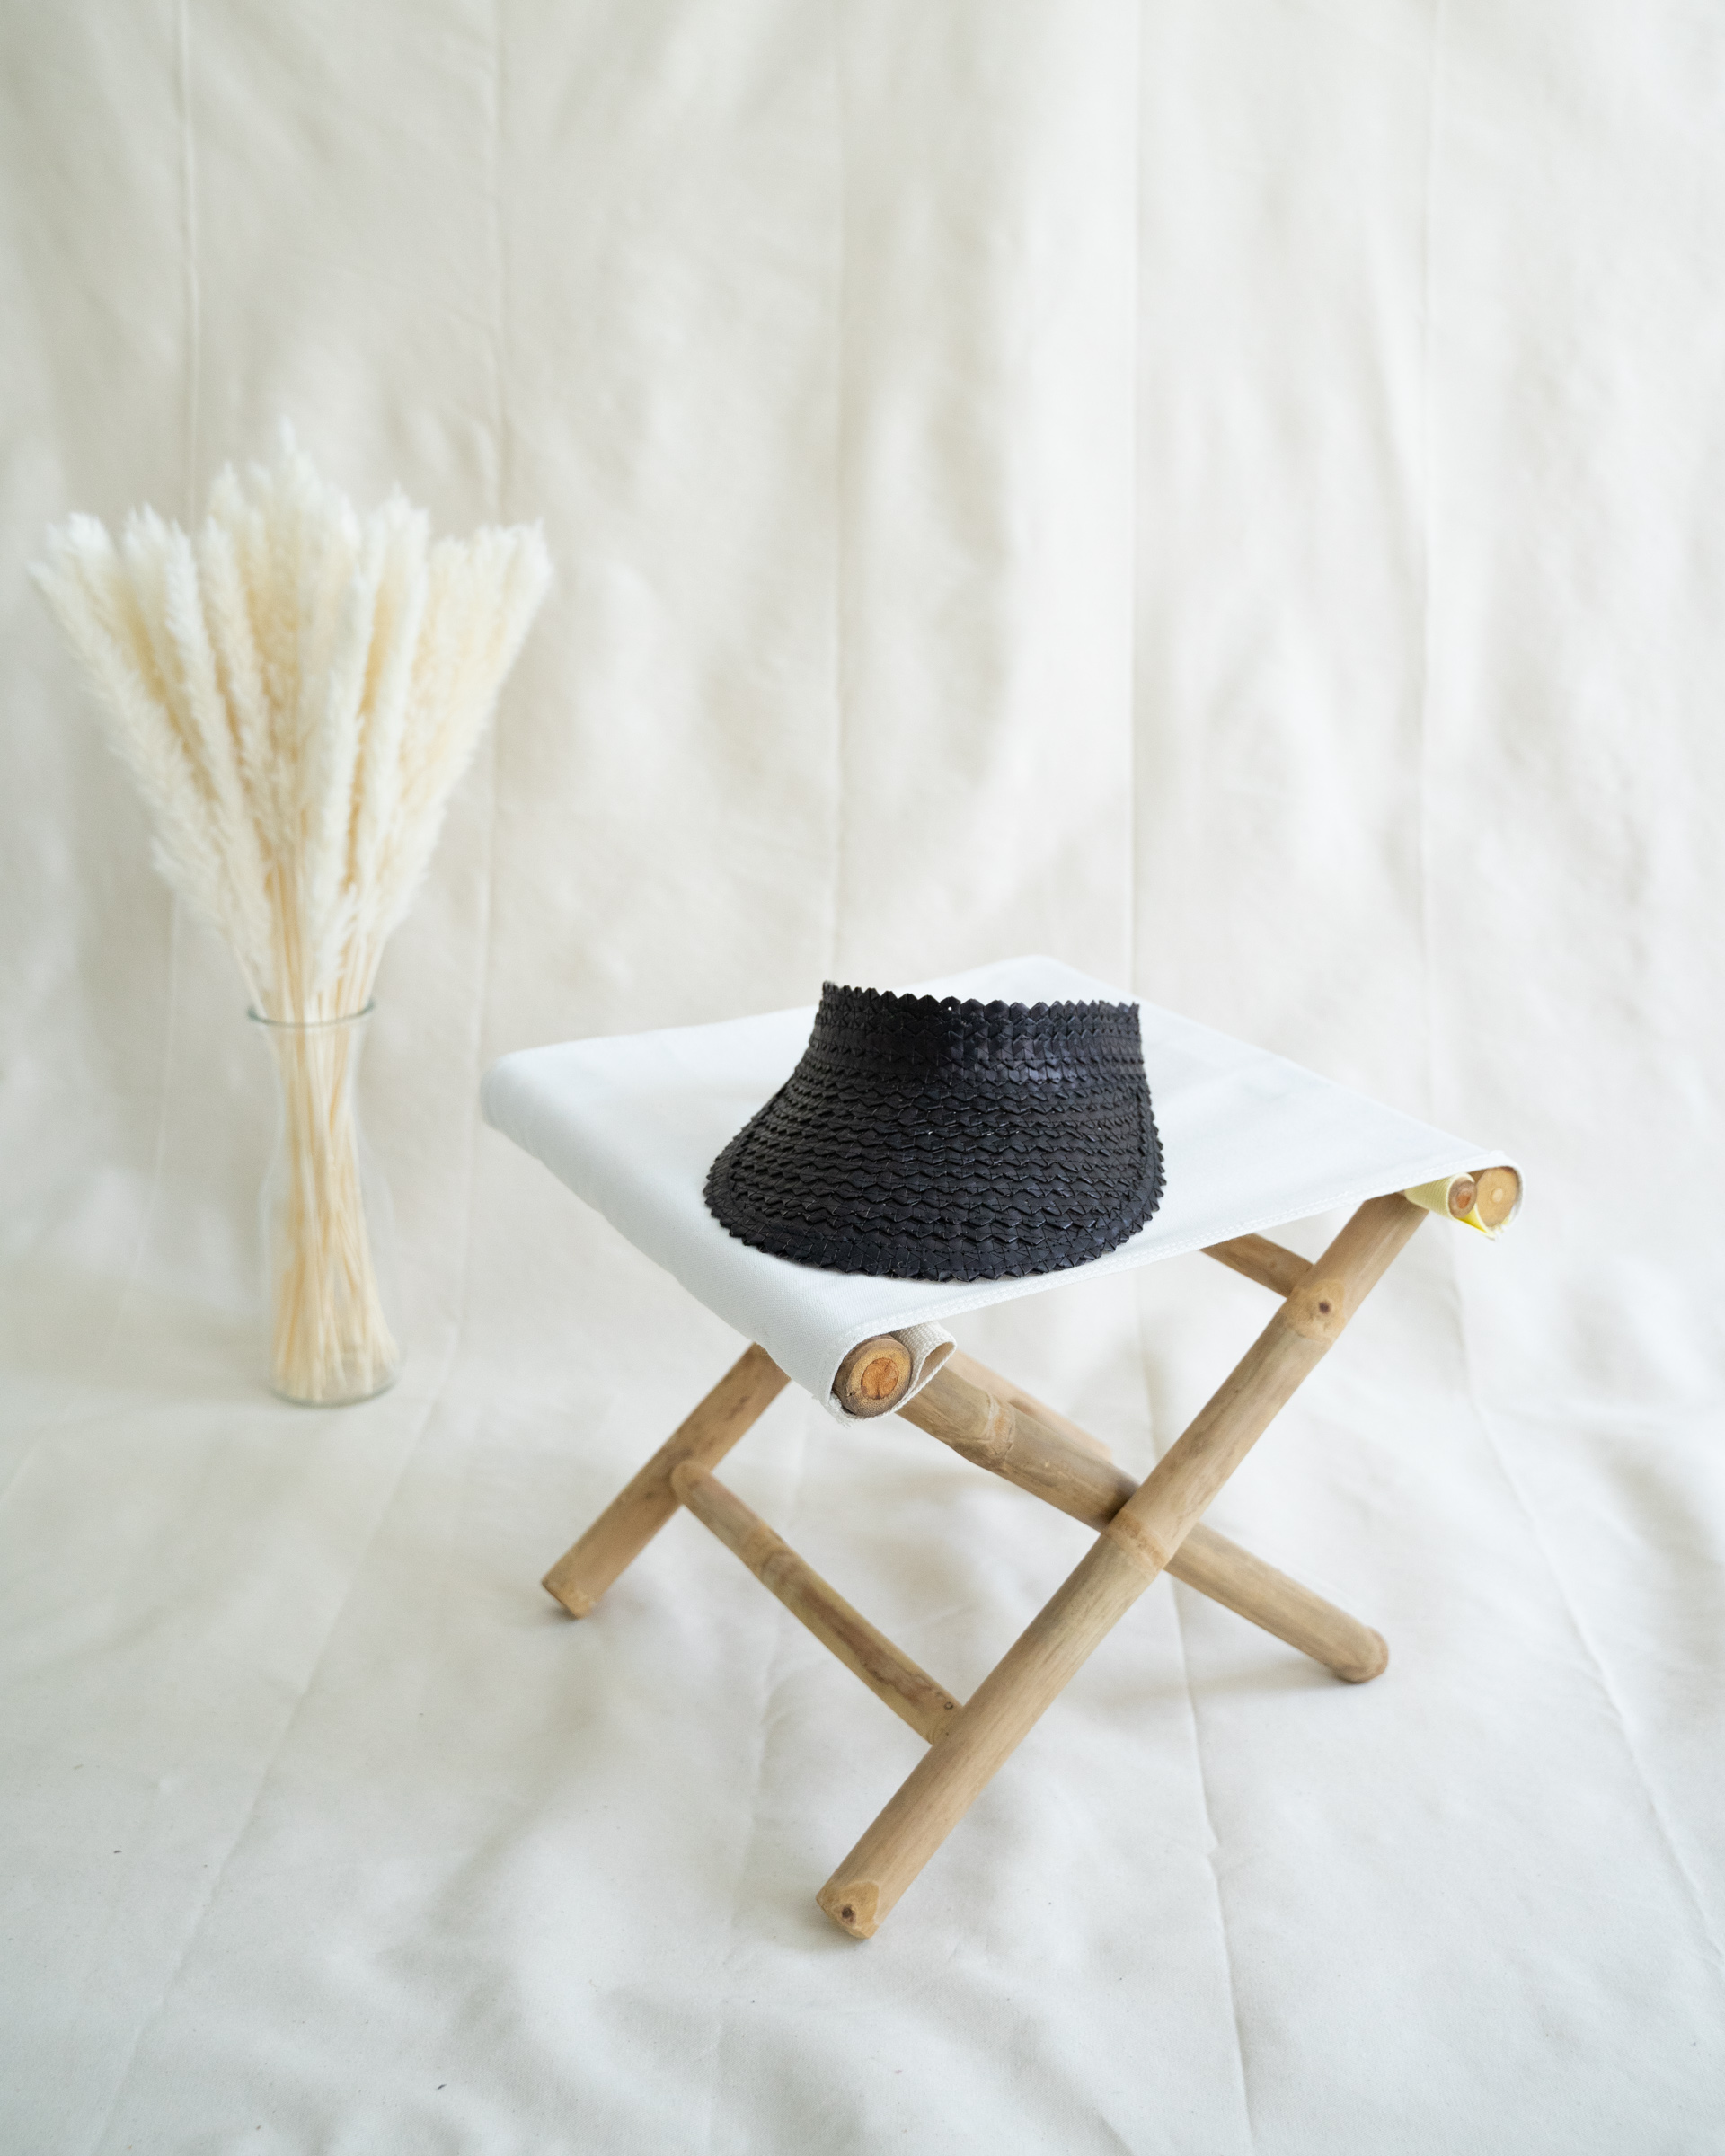 Color: Visor “Lembongan” made out of straw in black